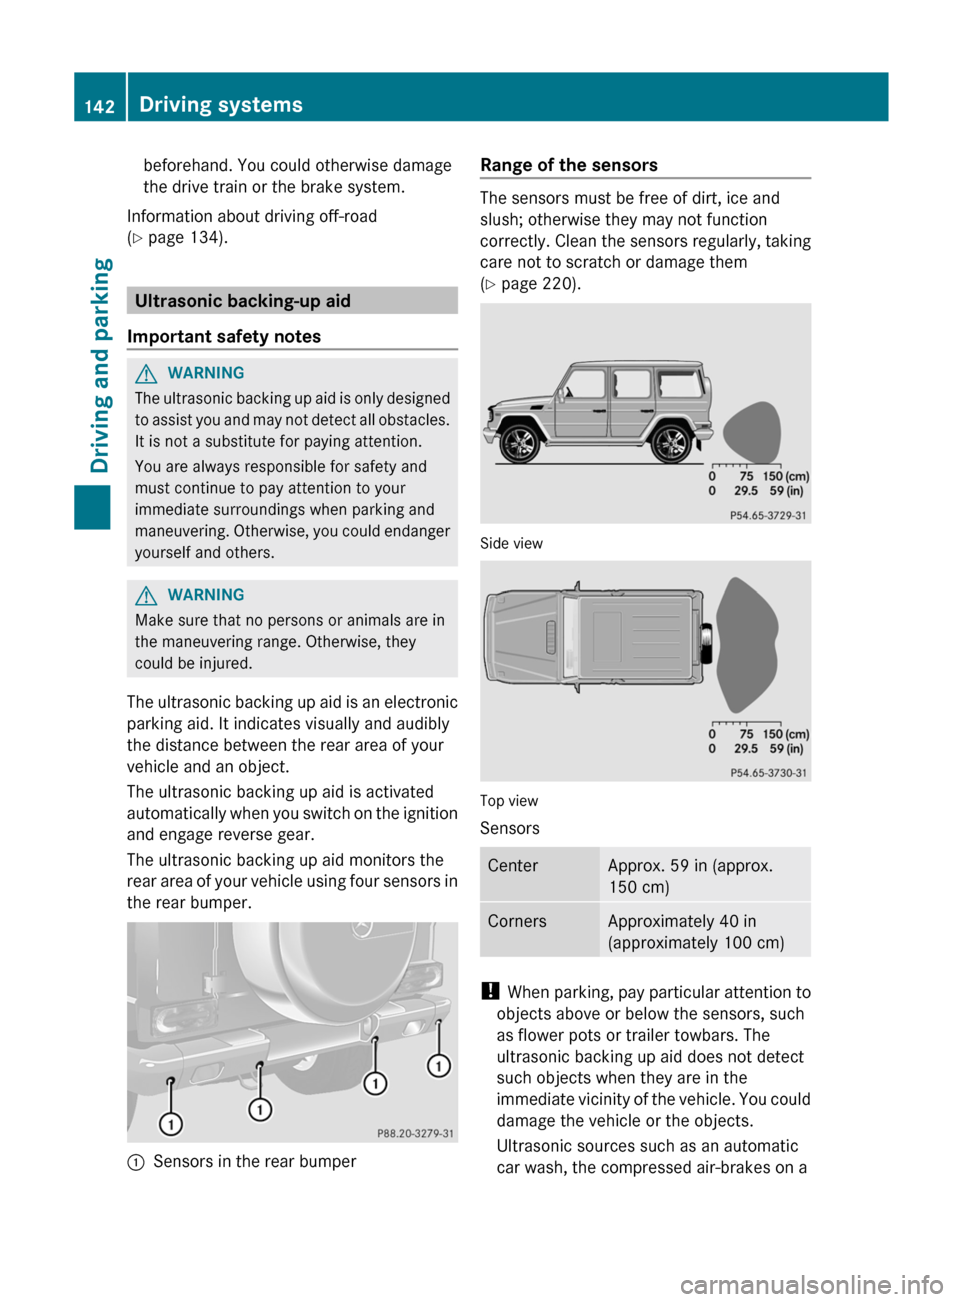 MERCEDES-BENZ G-Class 2012 W463 Owners Manual beforehand. You could otherwise damage
the drive train or the brake system.
Information about driving off-road
(Y page 134). Ultrasonic backing-up aid
Important safety notes G
WARNING
The ultrasonic b